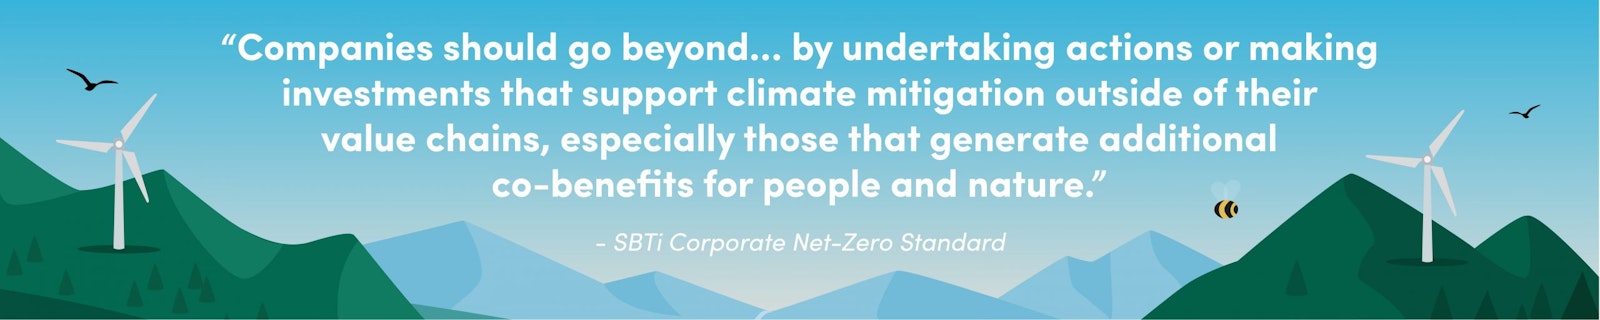 “Companies should go beyond … by undertaking actions or making investments that support climate mitigation outside of their value chains, especially those that generate additional co-benefits for people and nature.” - SBTi